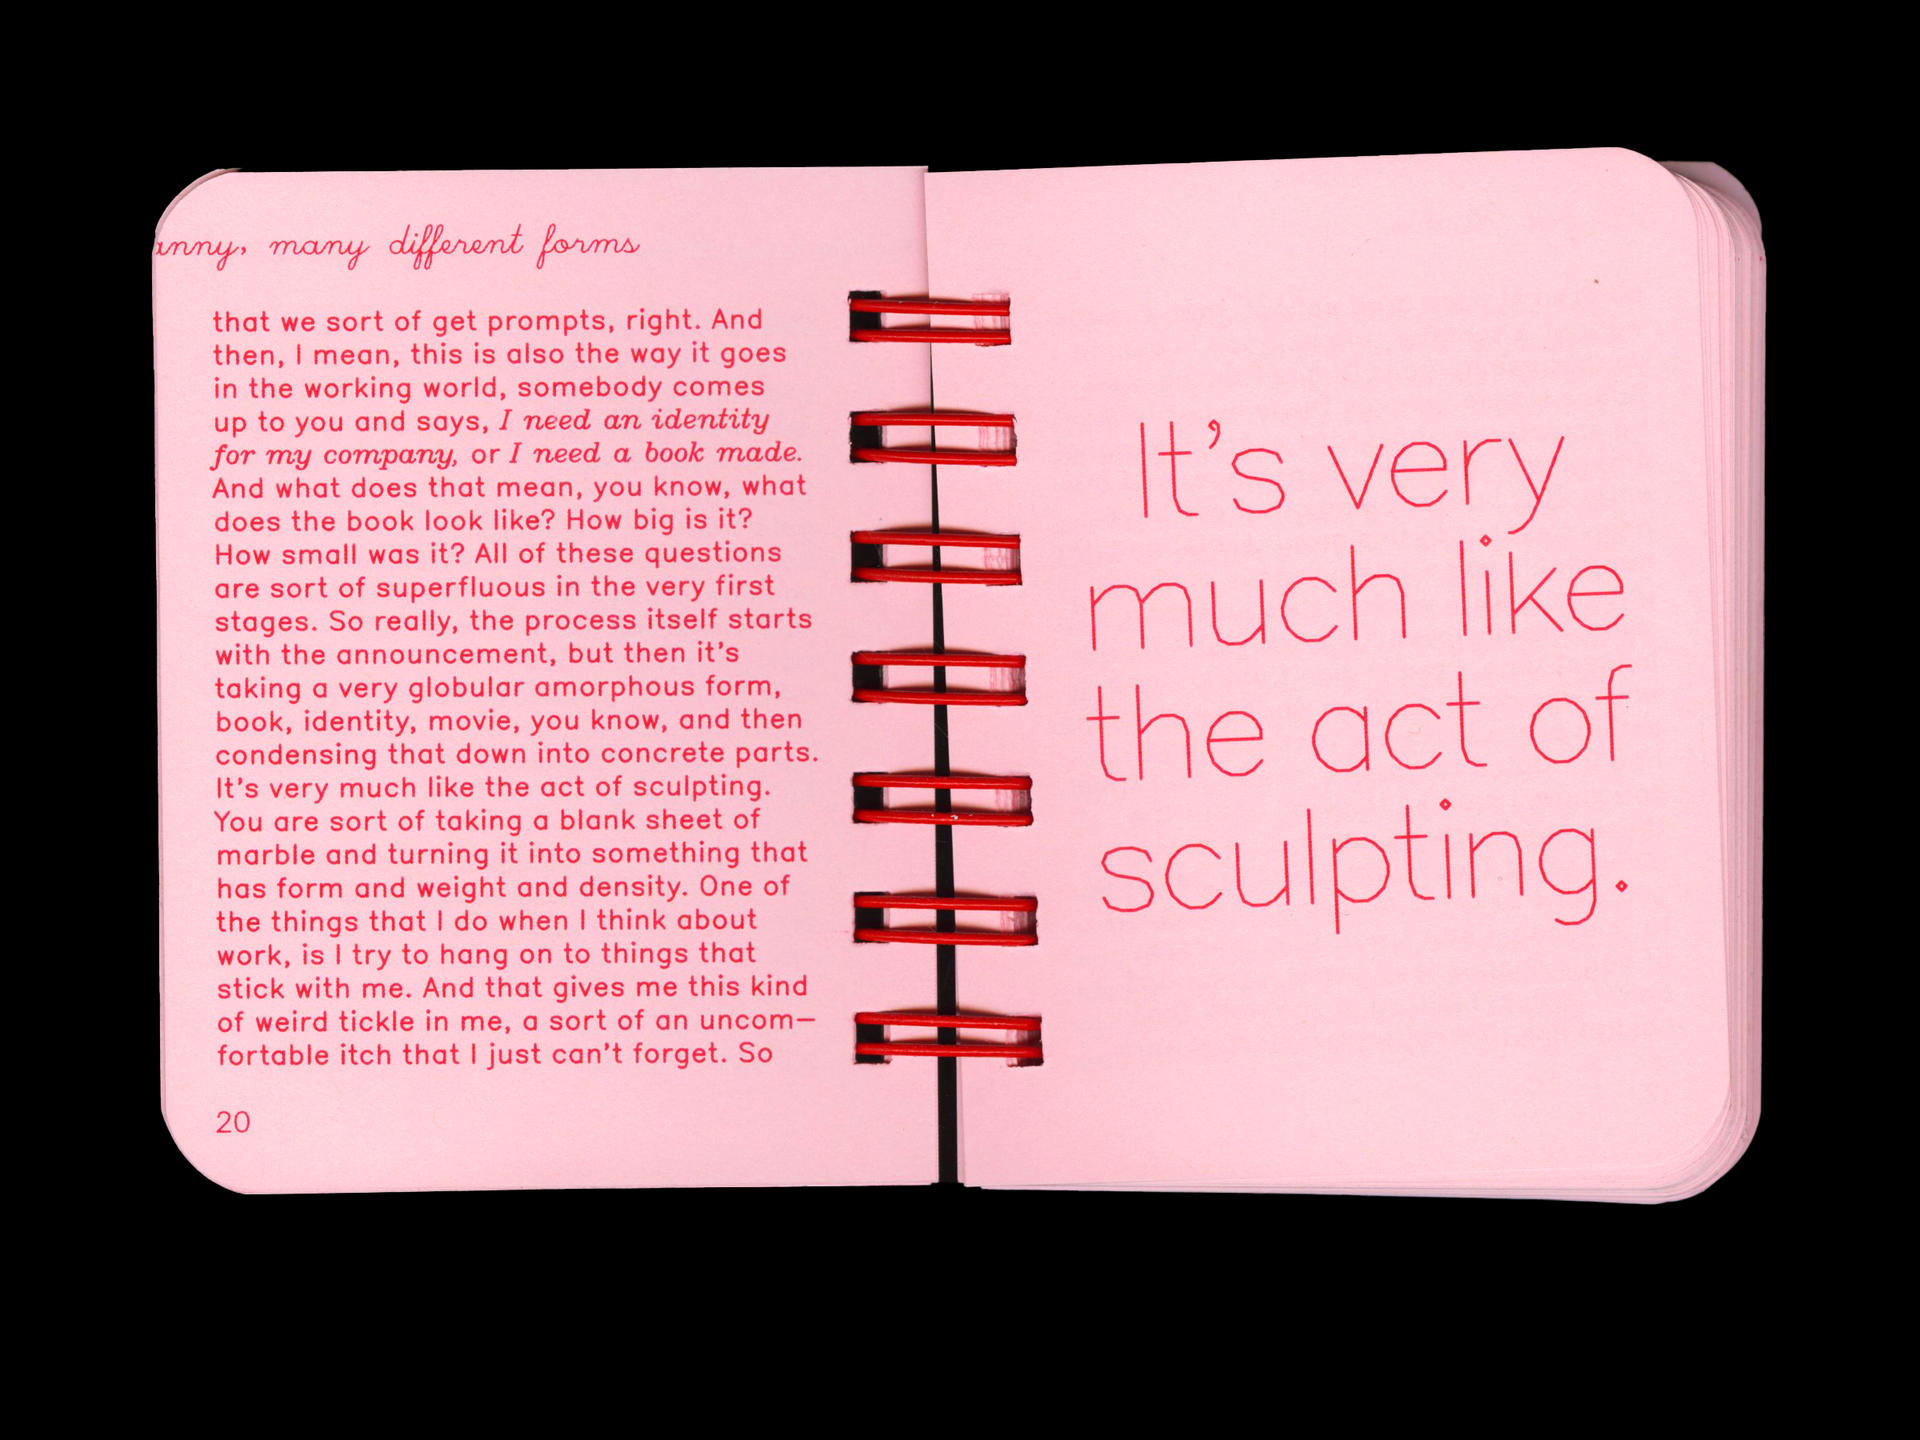 Pink book with red type on it. The left page has denser text, while the right page reads "It's very much like the act of sculpting".